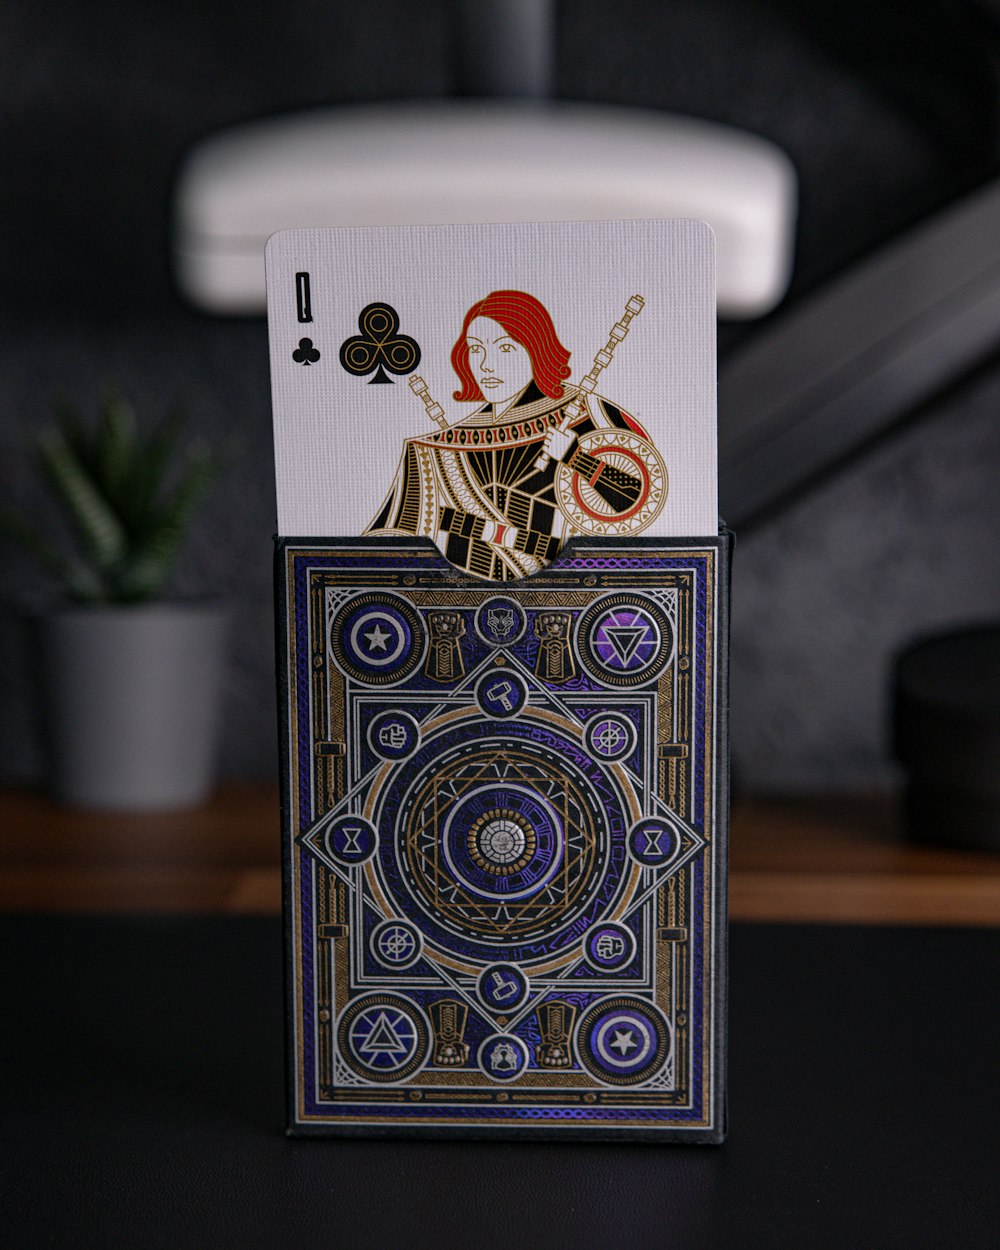 a deck of playing cards with a woman on it